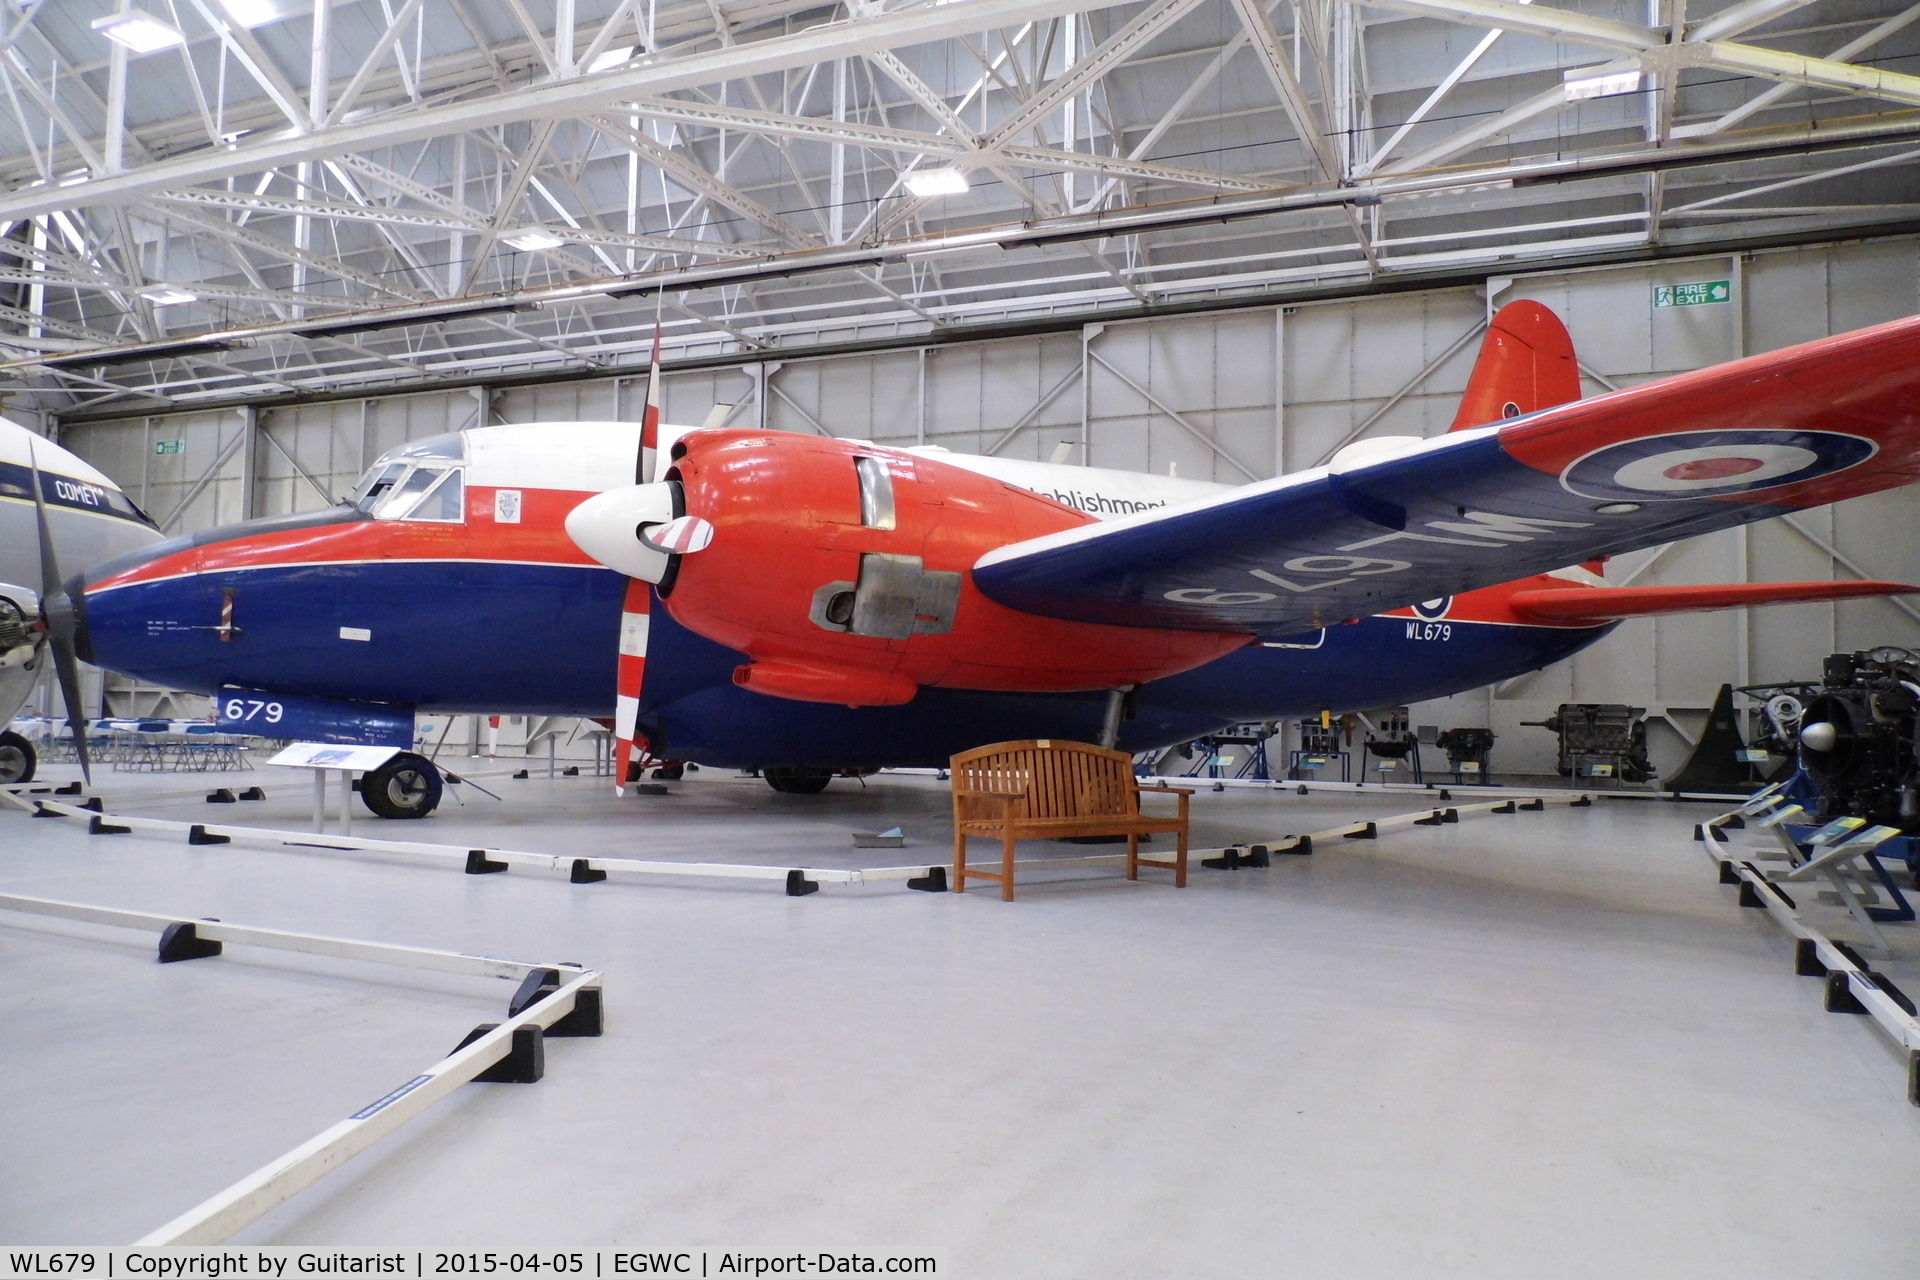 WL679, 1953 Vickers Varsity T.1 C/N Not found WL679, Cosford Air Museum